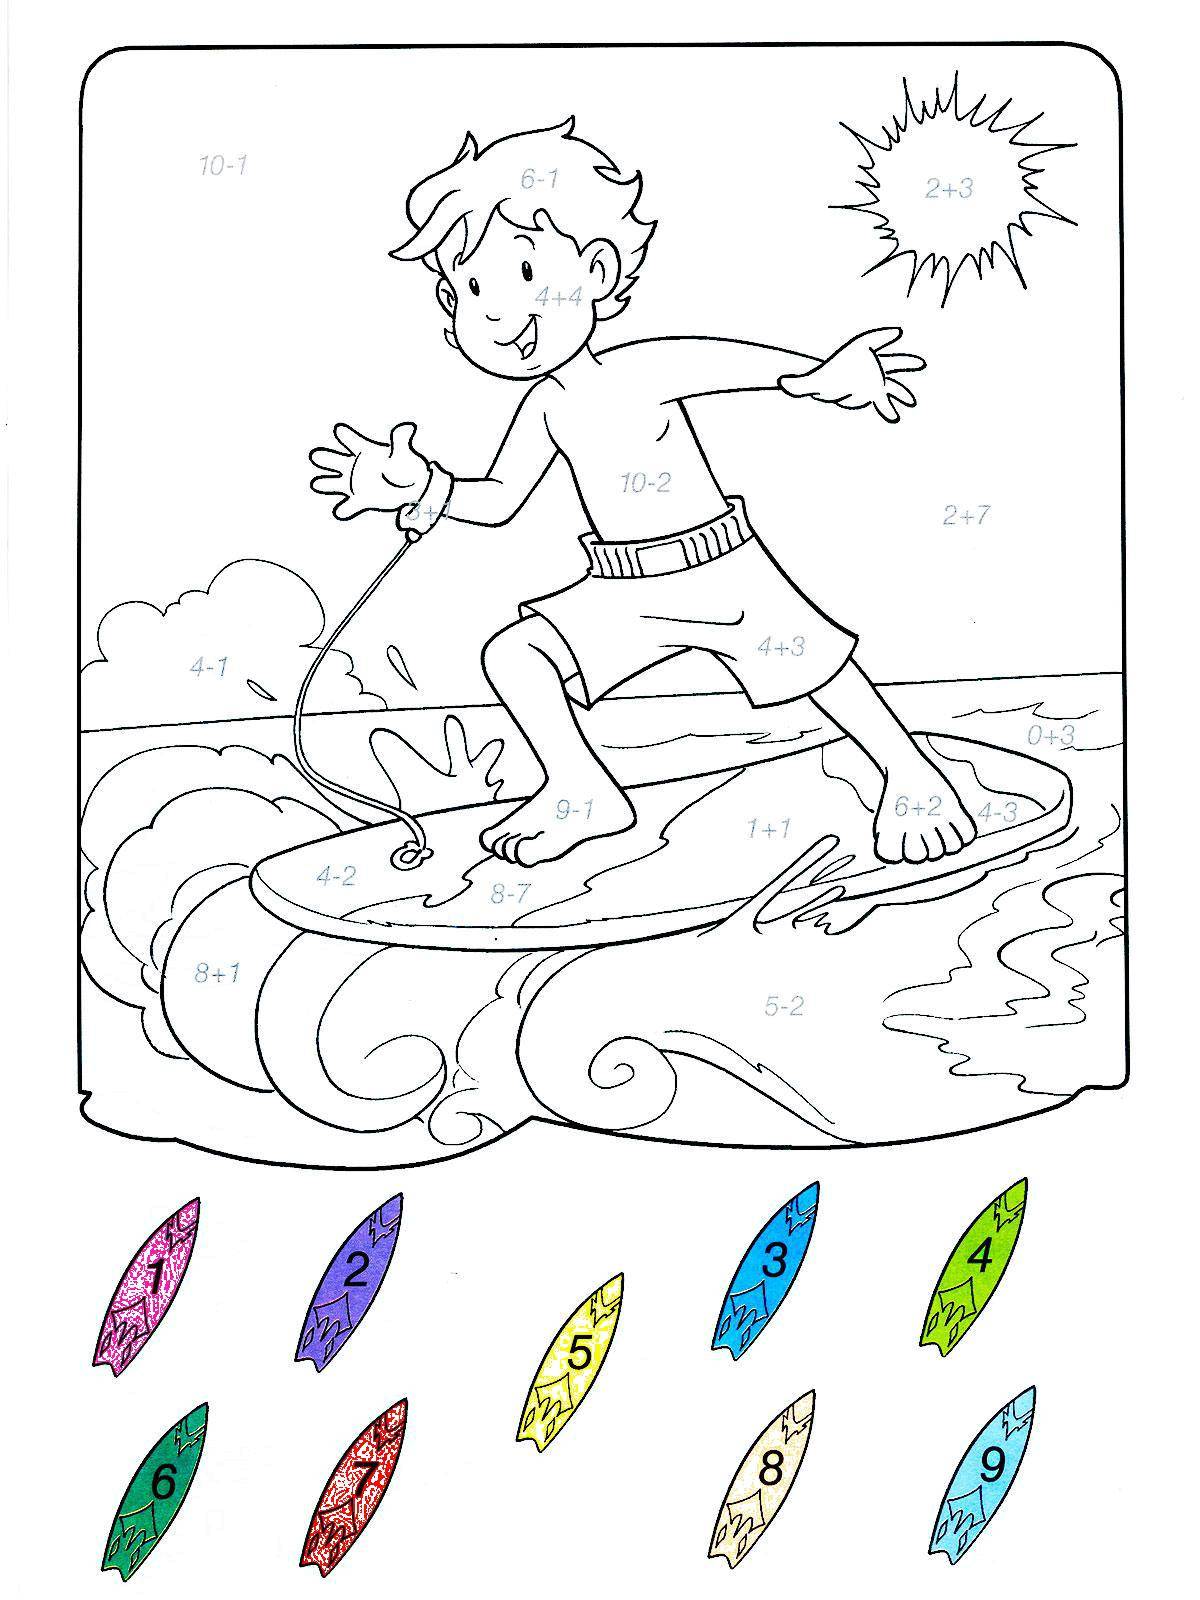 Coloring Paint a surfer deciding examples. Category mathematical coloring pages. Tags:  sports, surfing, examples.